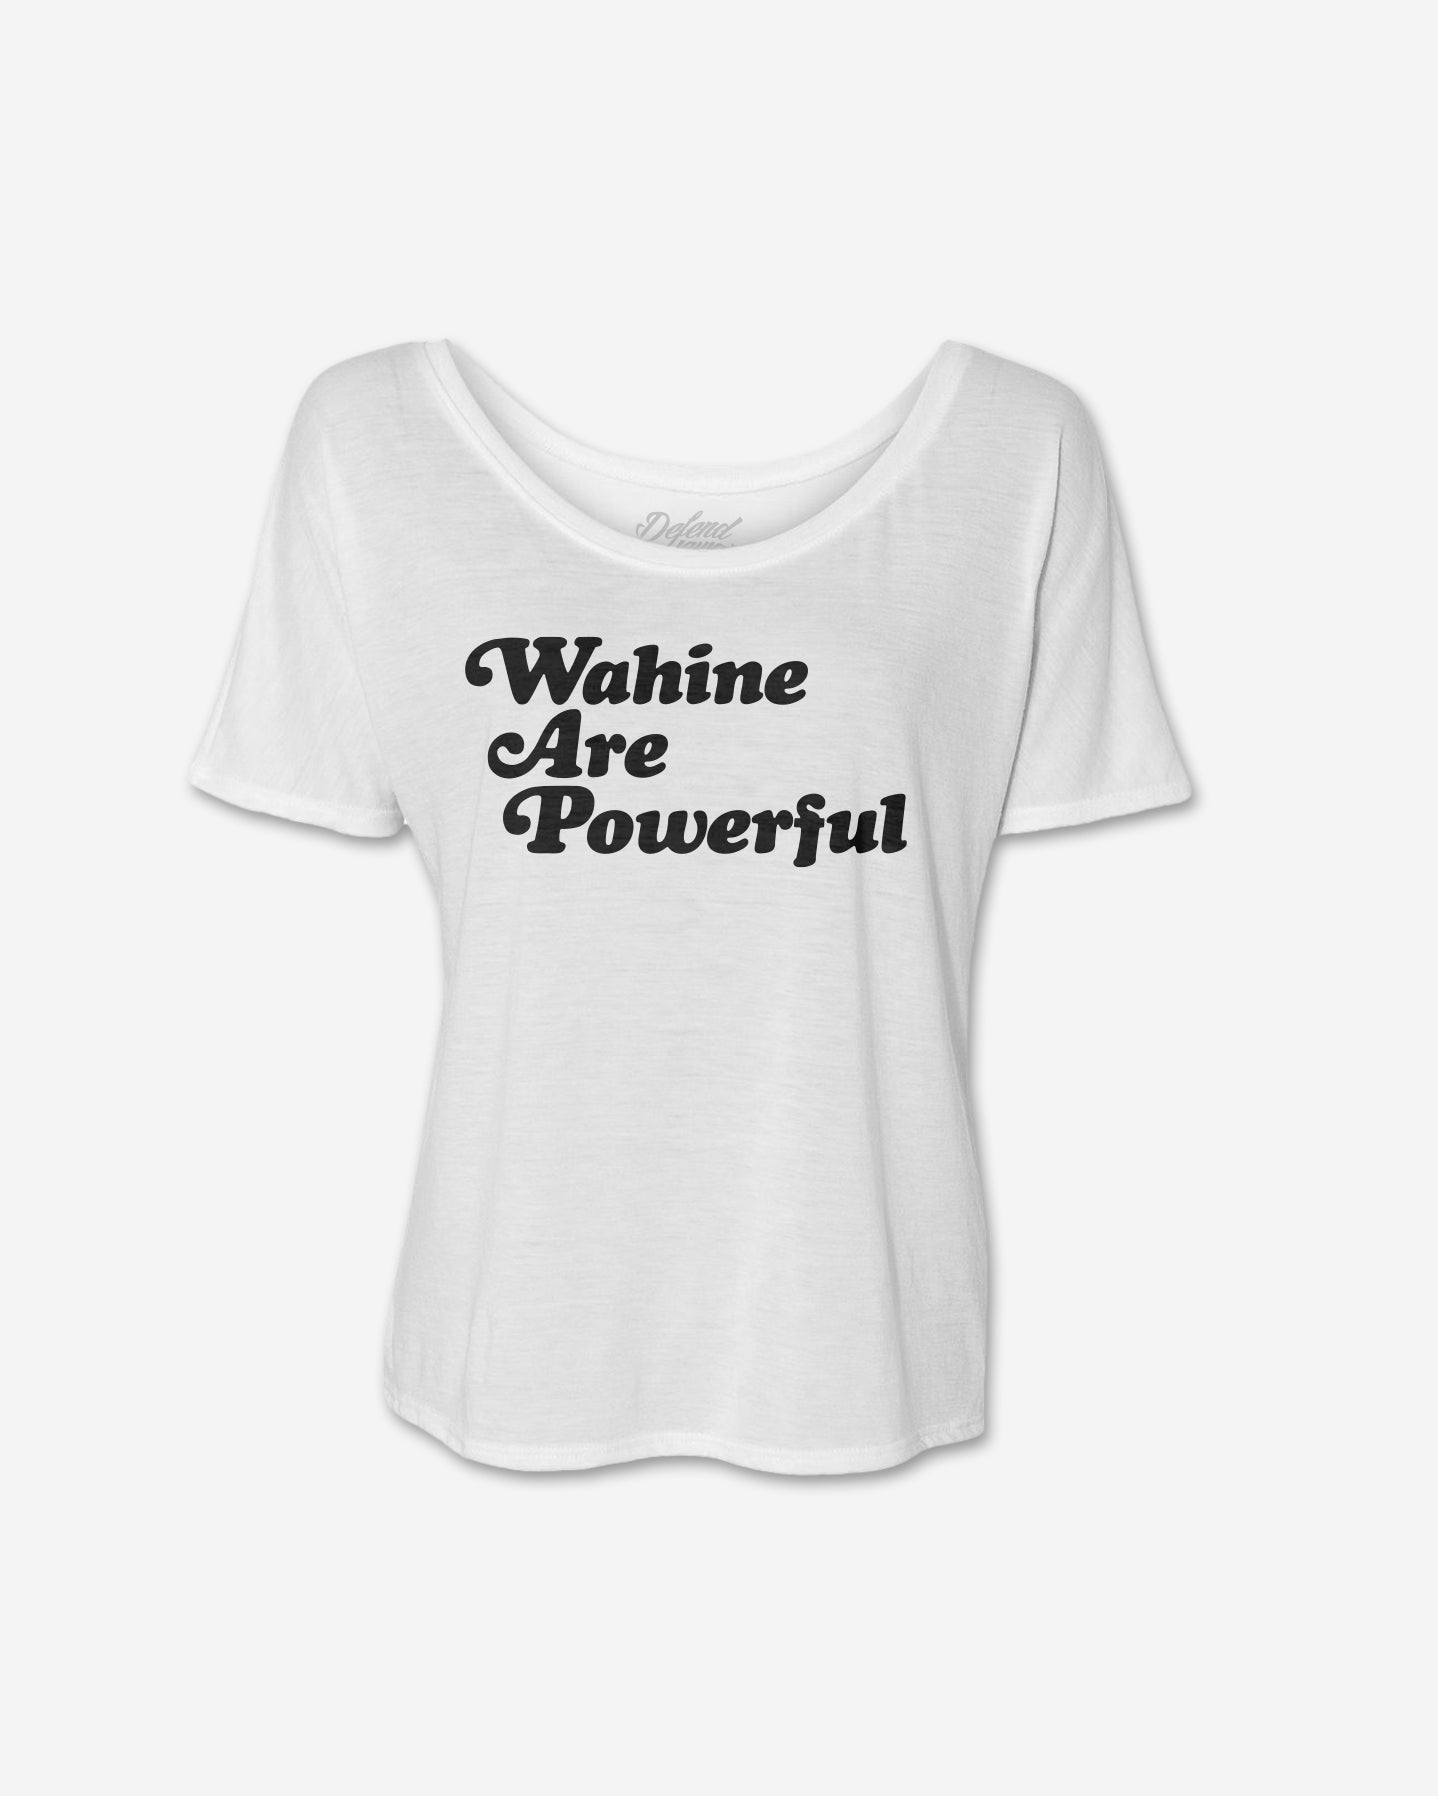 Women's Collection – tagged 